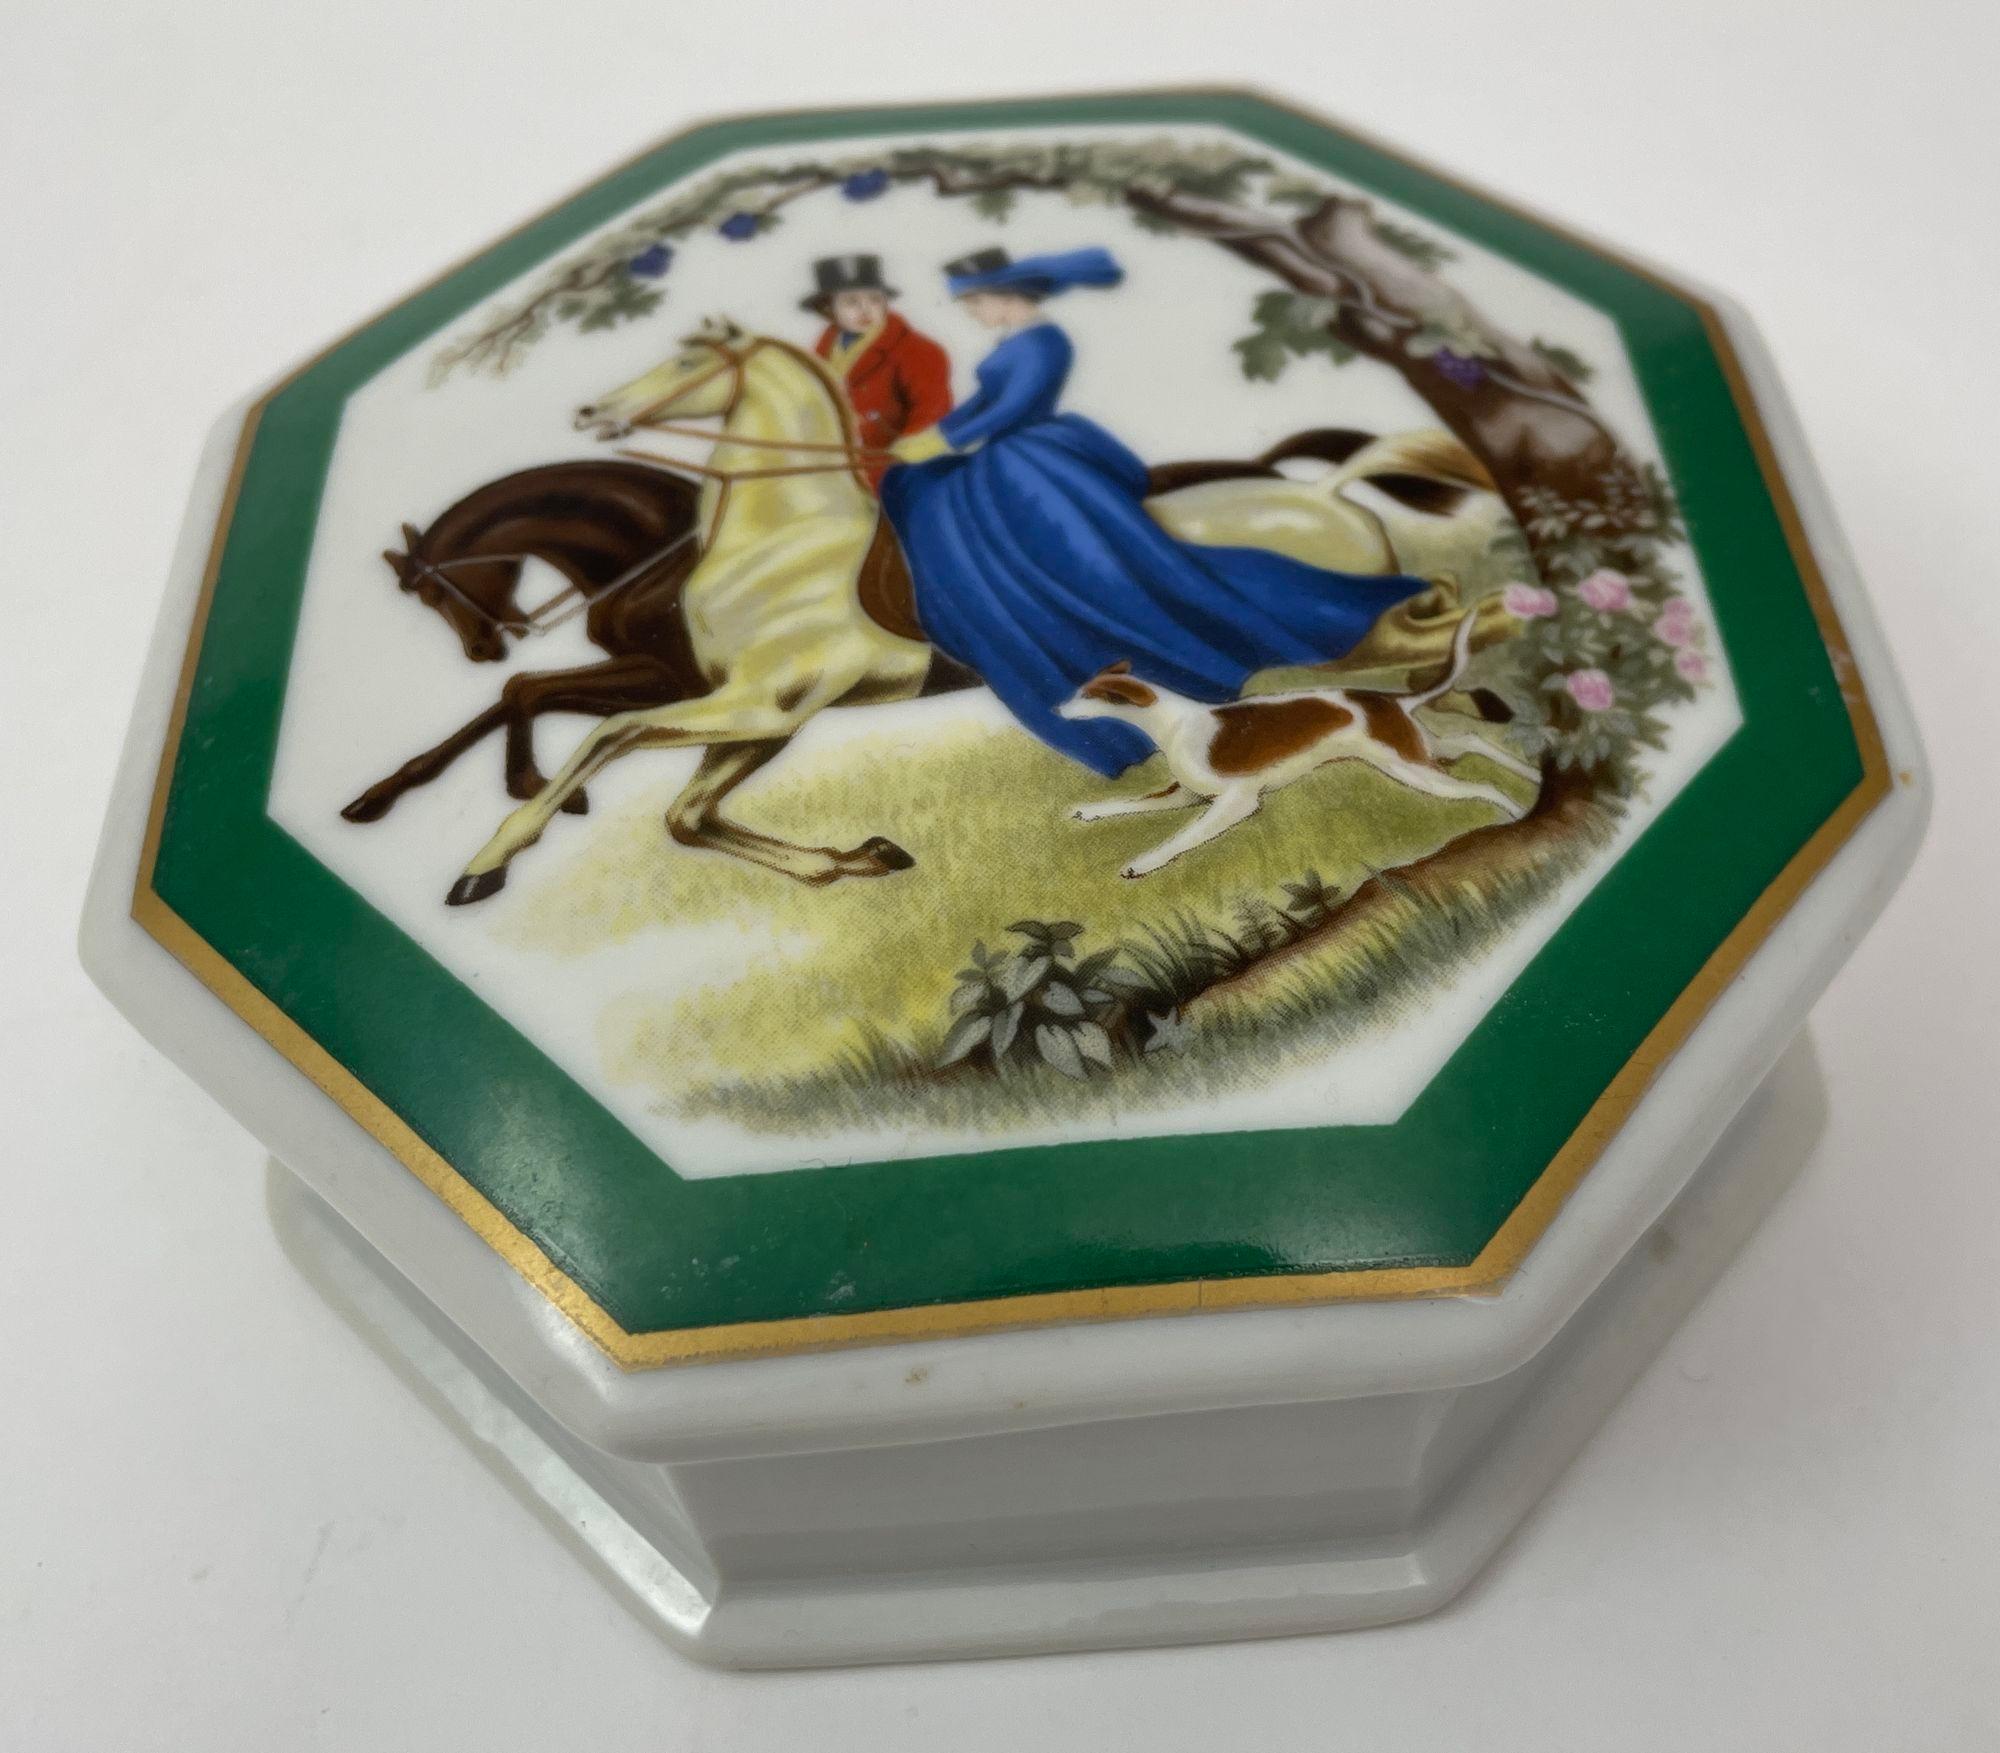 Hand-Painted Elizabeth Arden Porcelain Box Southern Heirlooms Made In Japan For Sale